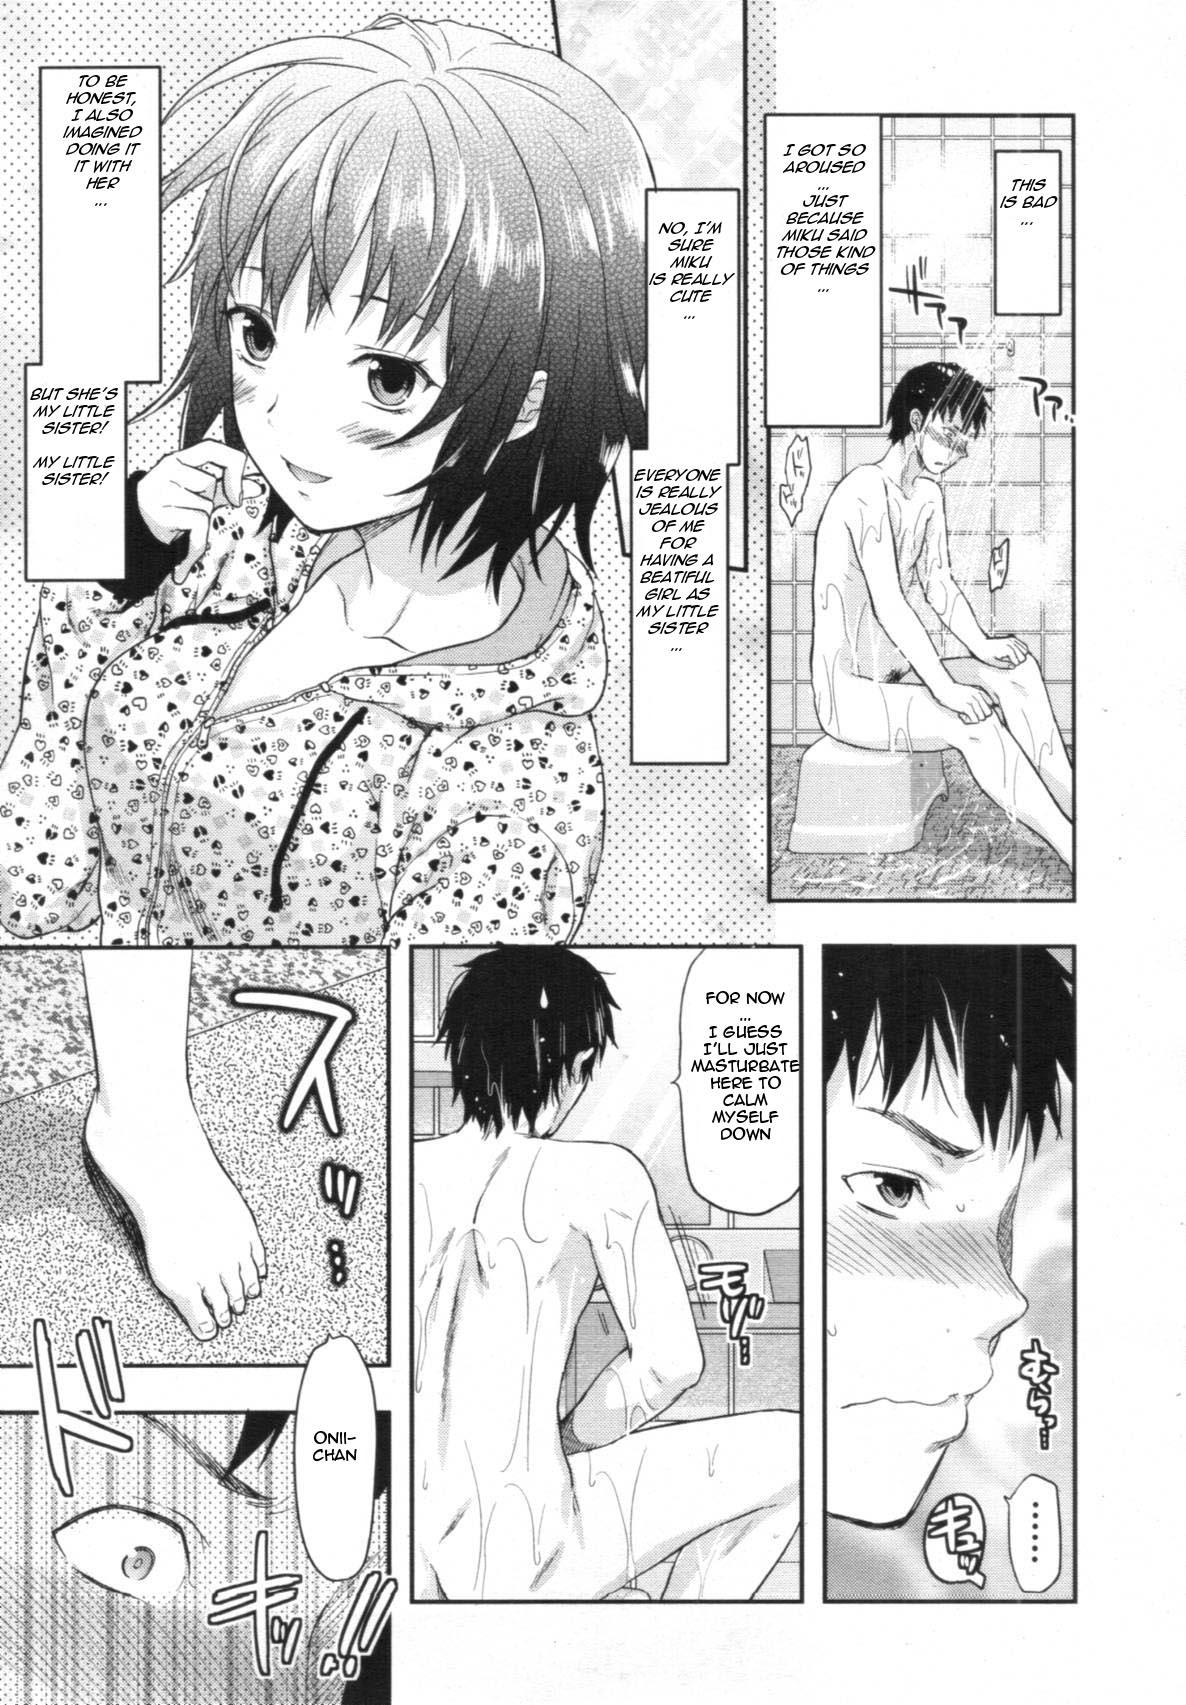 Best Blowjob Ever Imouto Lip | Little Sister Lip 1-2 Nice Tits - Page 7